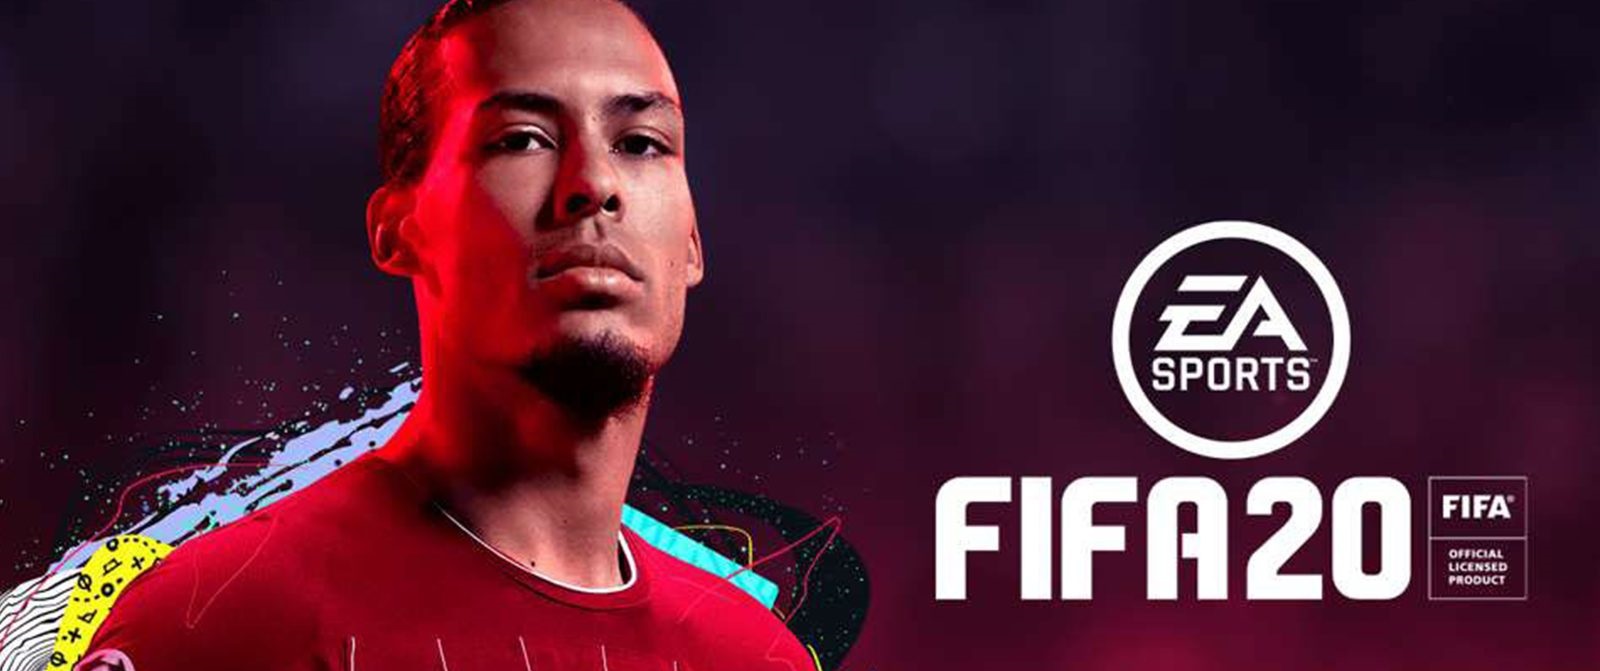 test FIFA 20 blog jeux video gaming lageekroom football Electronic Arts